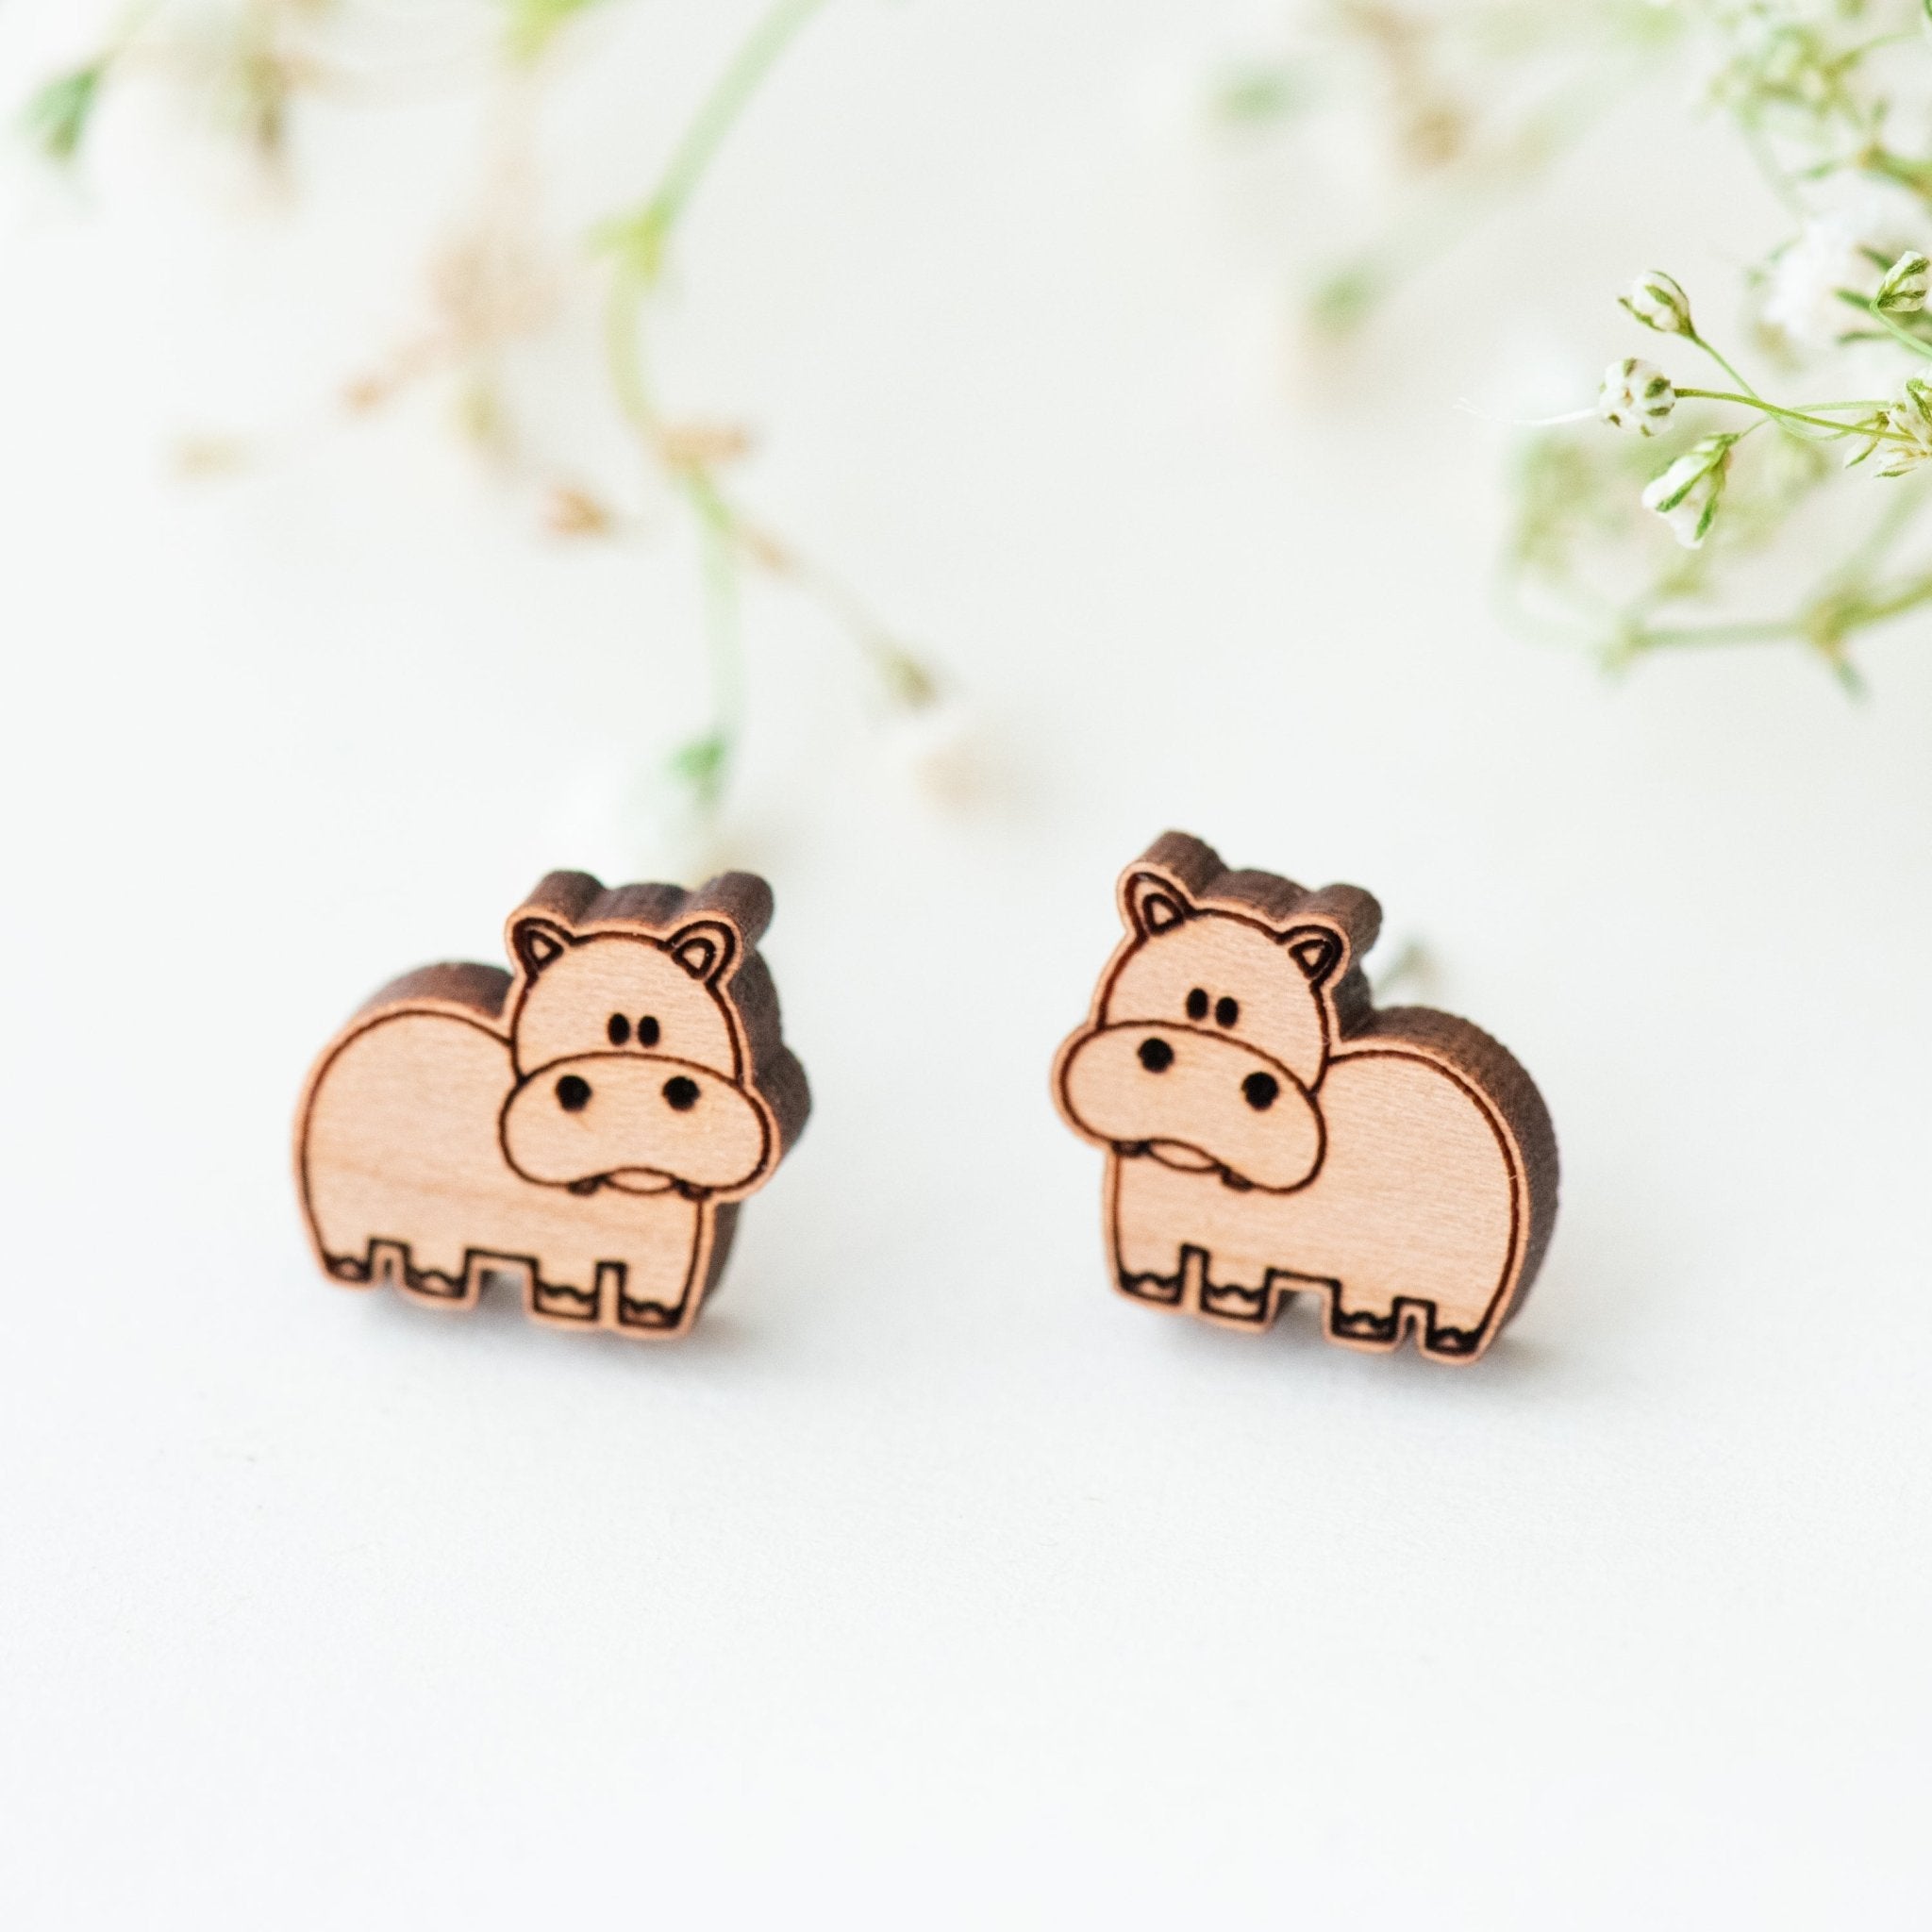 Hippo Cherry Wood Stud Earrings - EL10044 - Robin Valley Official Store